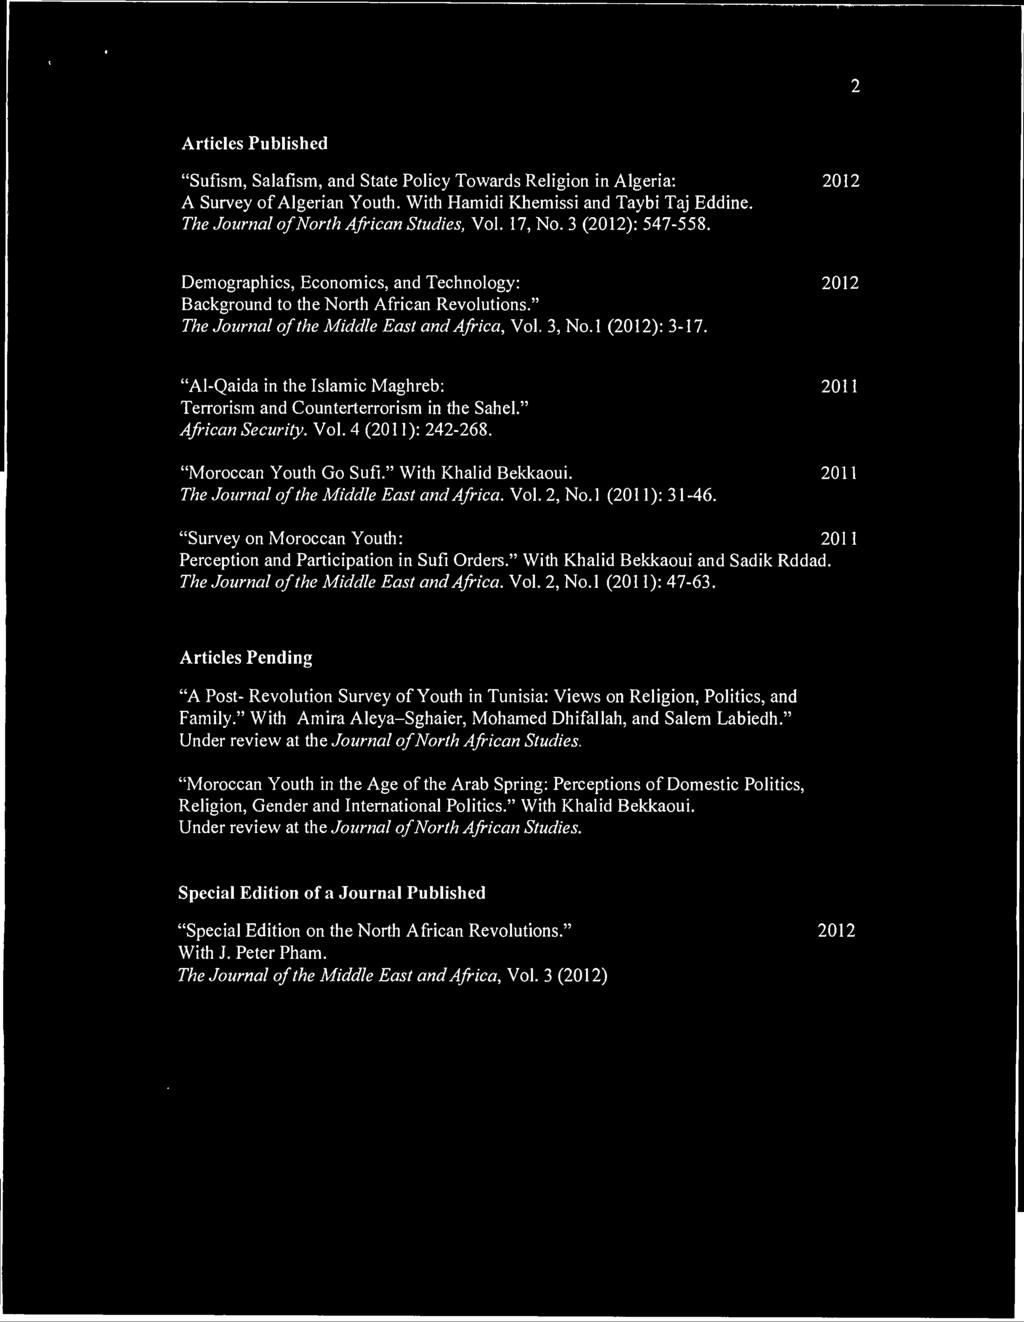 " The Journal of the Middle East and Africa, Vol. 3, No.l (2012): 3-17. "Al-Qaida in the Islamic Maghreb: 2011 Terrorism and Counterterrorism in the Sahel." African Security. Vol. 4 (2011): 242-268.